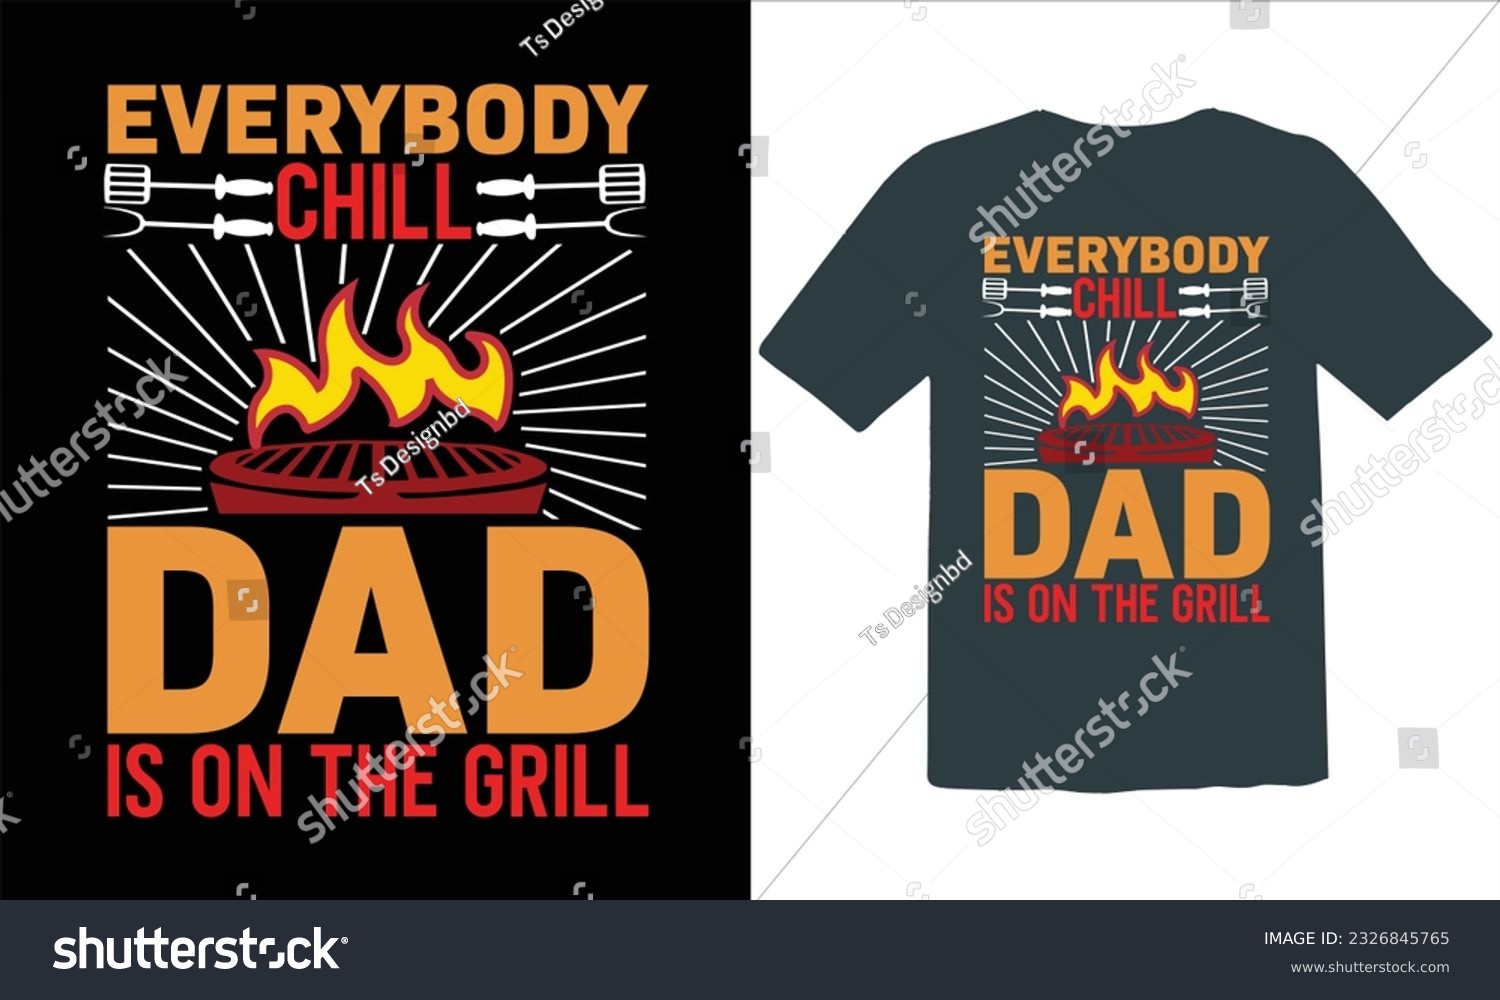 SVG of Everybody Chill Dad Is On The Grill  T Shirt Design,BBQ T-shirt design,typography BBQ shirts design,BBQ Grilling shirts design vectors,Barbeque t-shirt,Typography vector T-shirt design,BBQ Shirt, svg